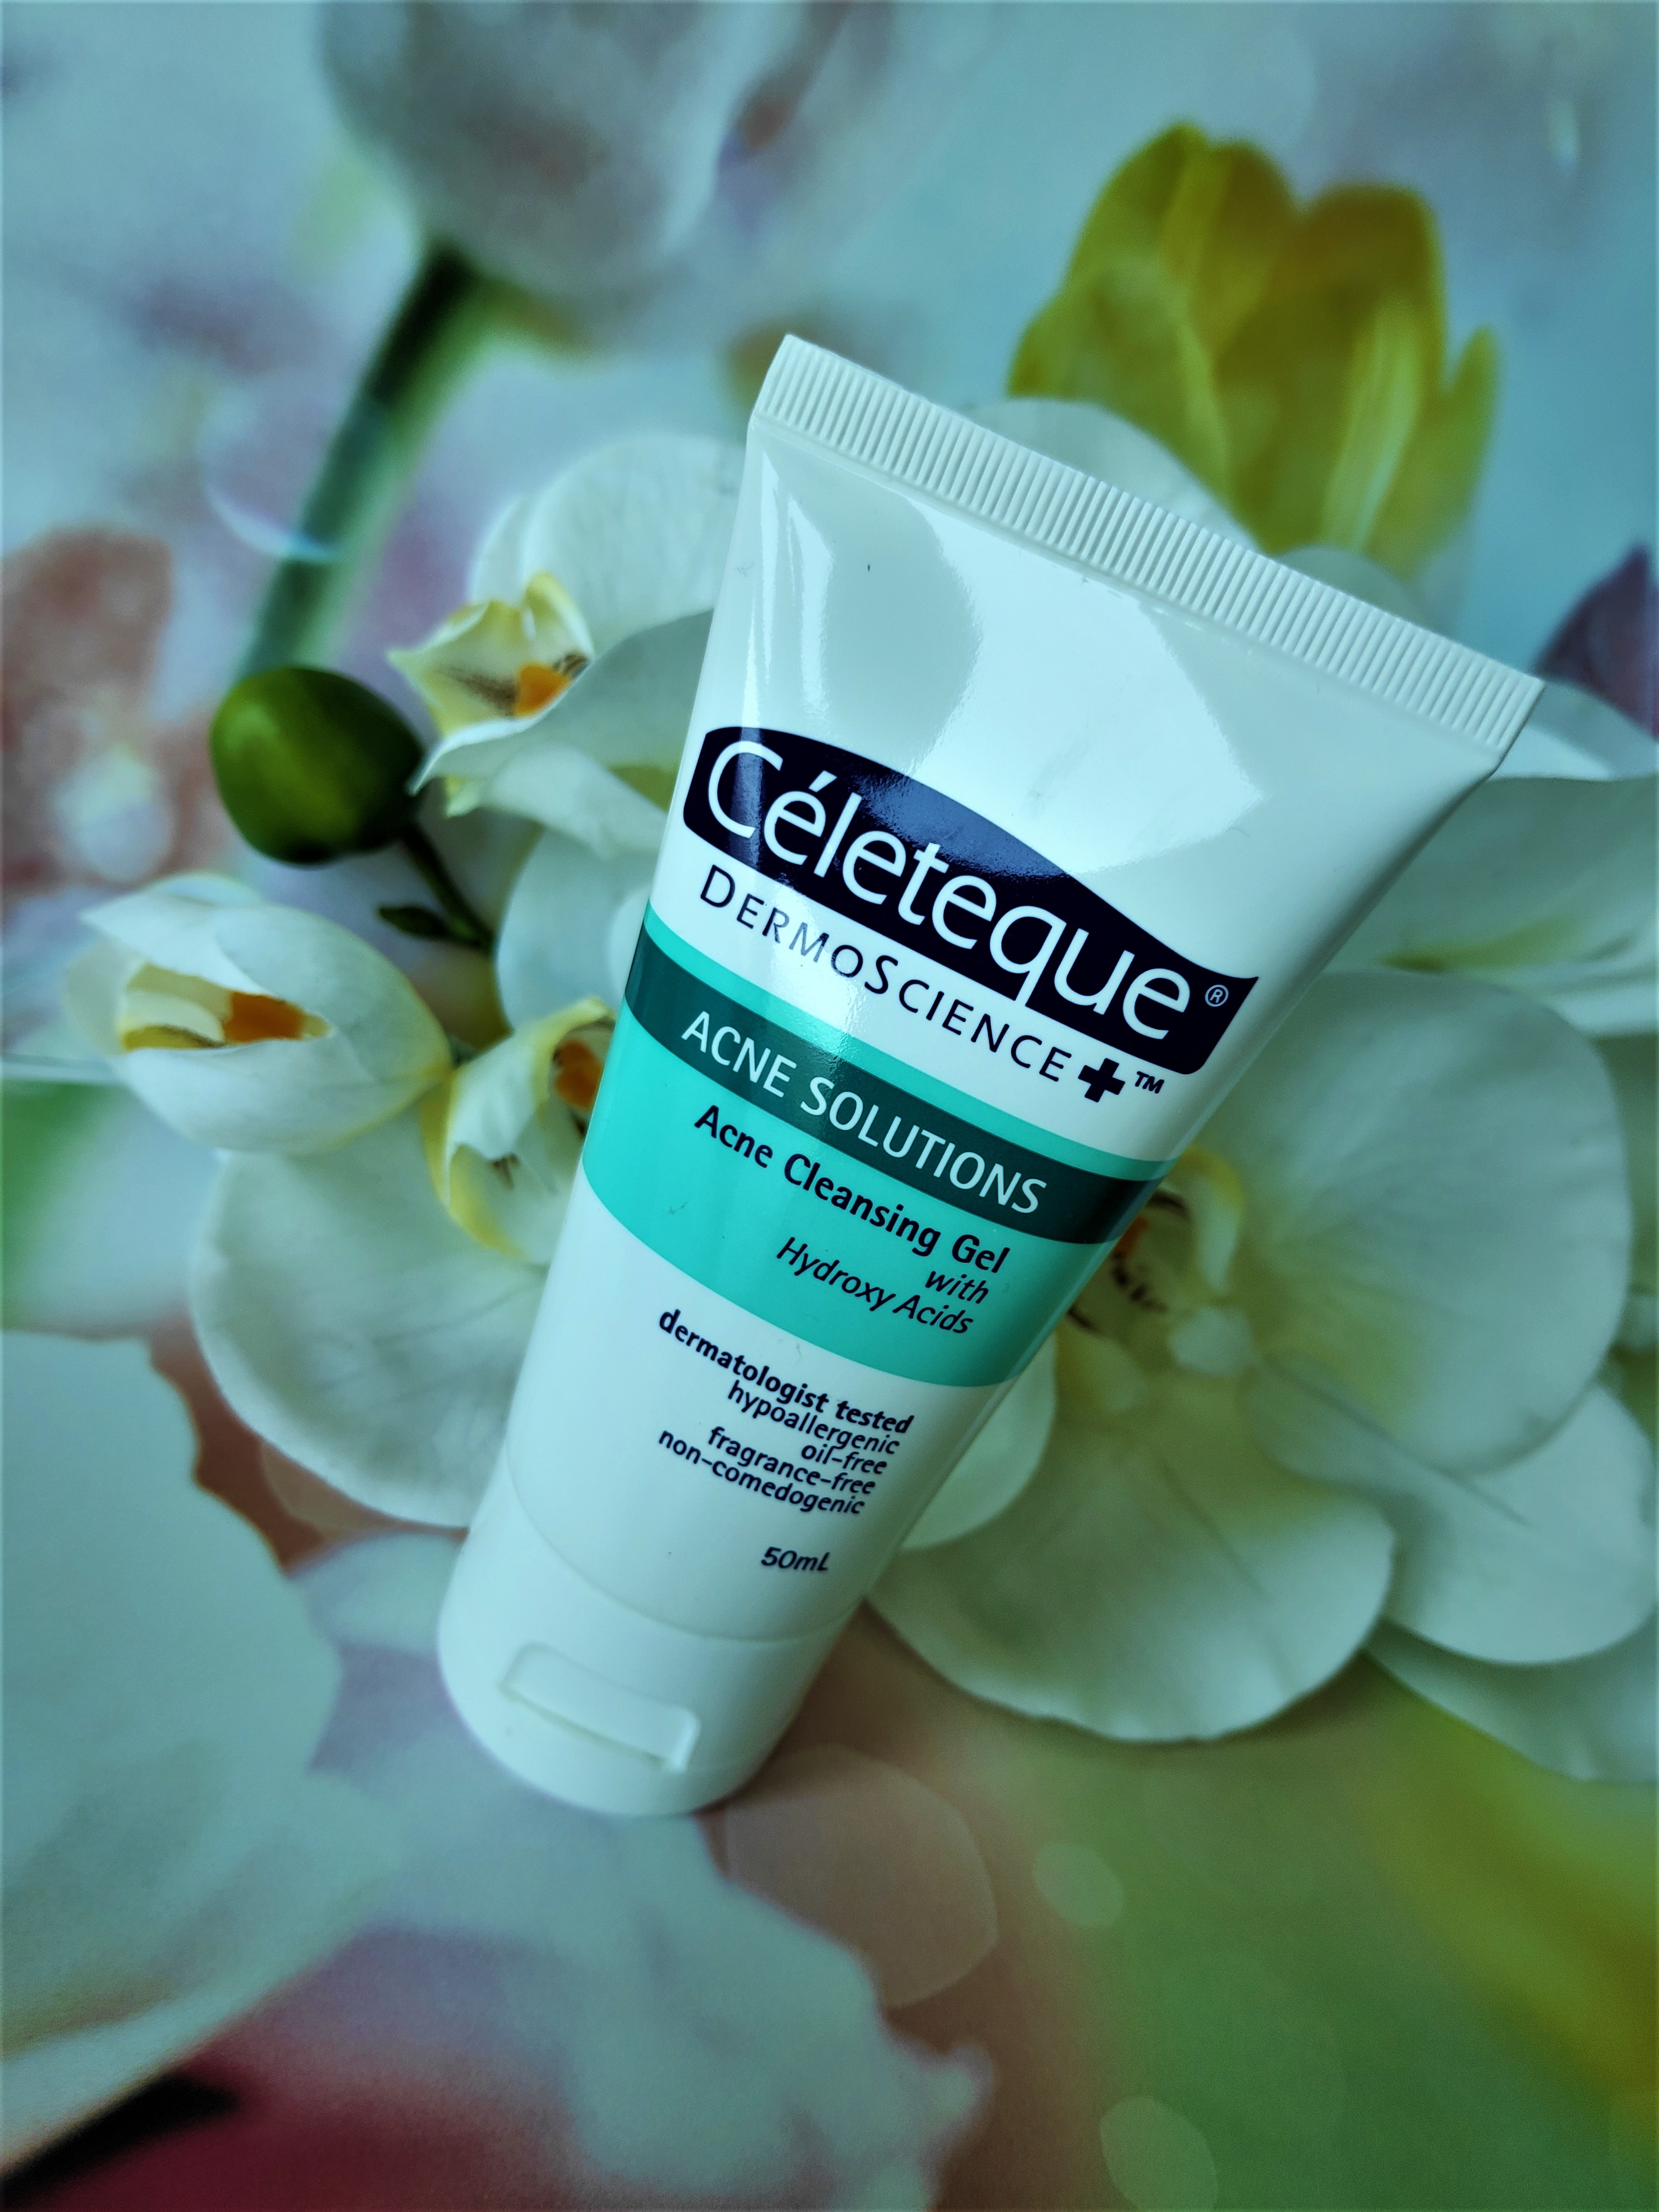 Celeteque Acne Solutions acne clearing gel.